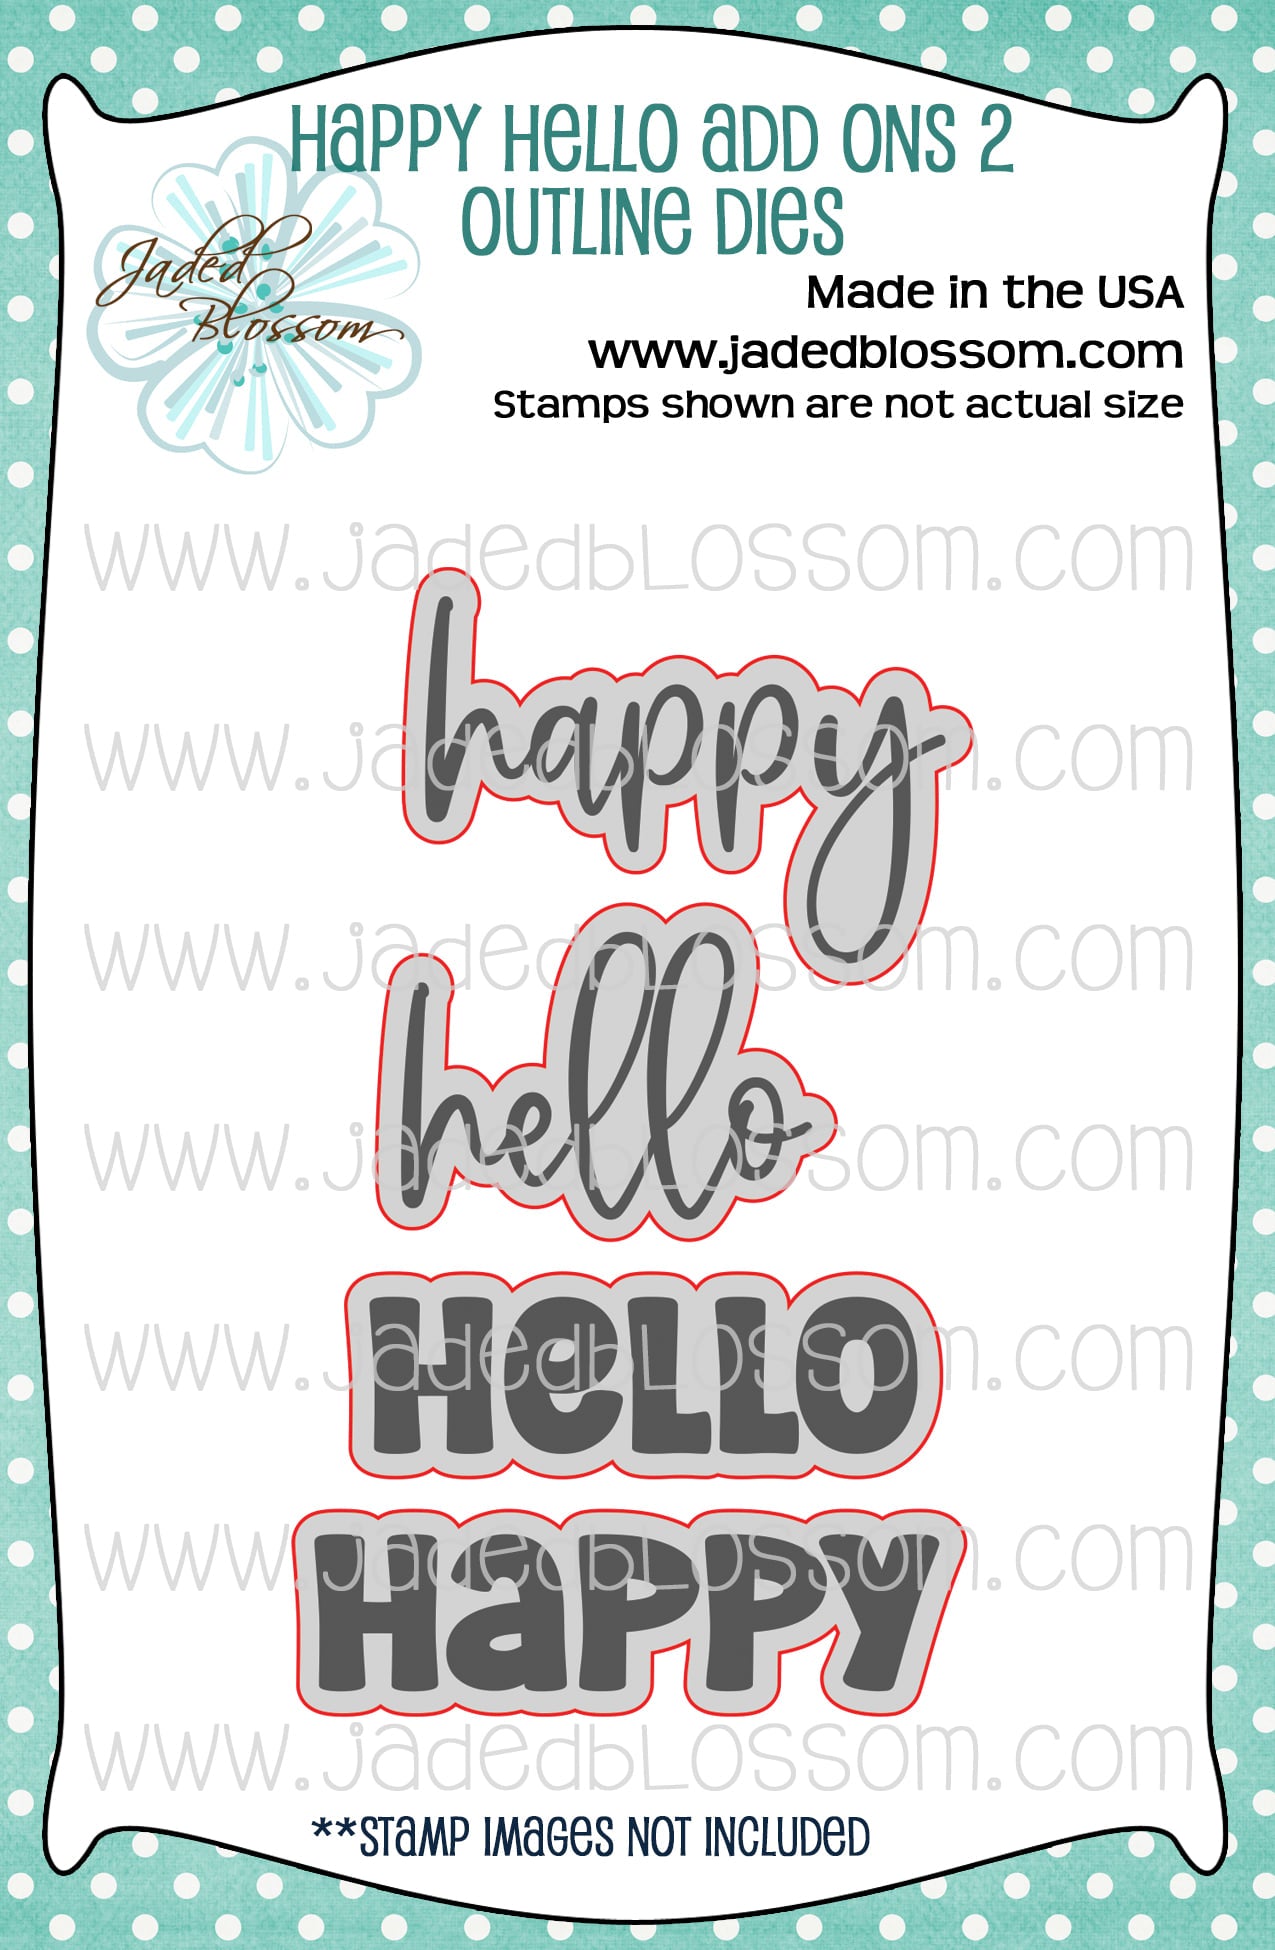 Happy Hello Add Ons 2 Outline Dies